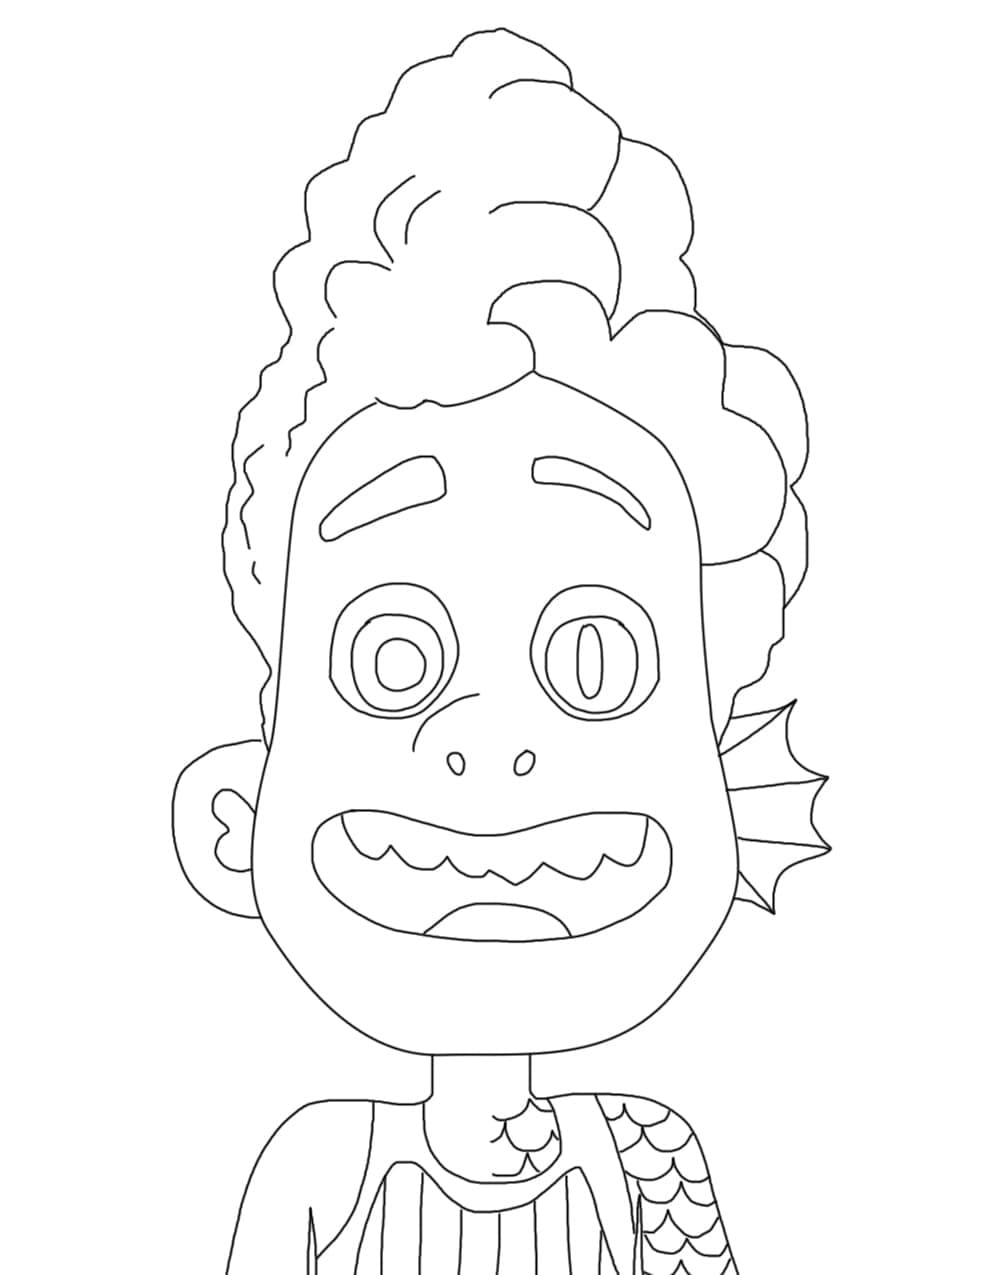 Disney Luca Alberto coloring page - Download, Print or Color Online for ...